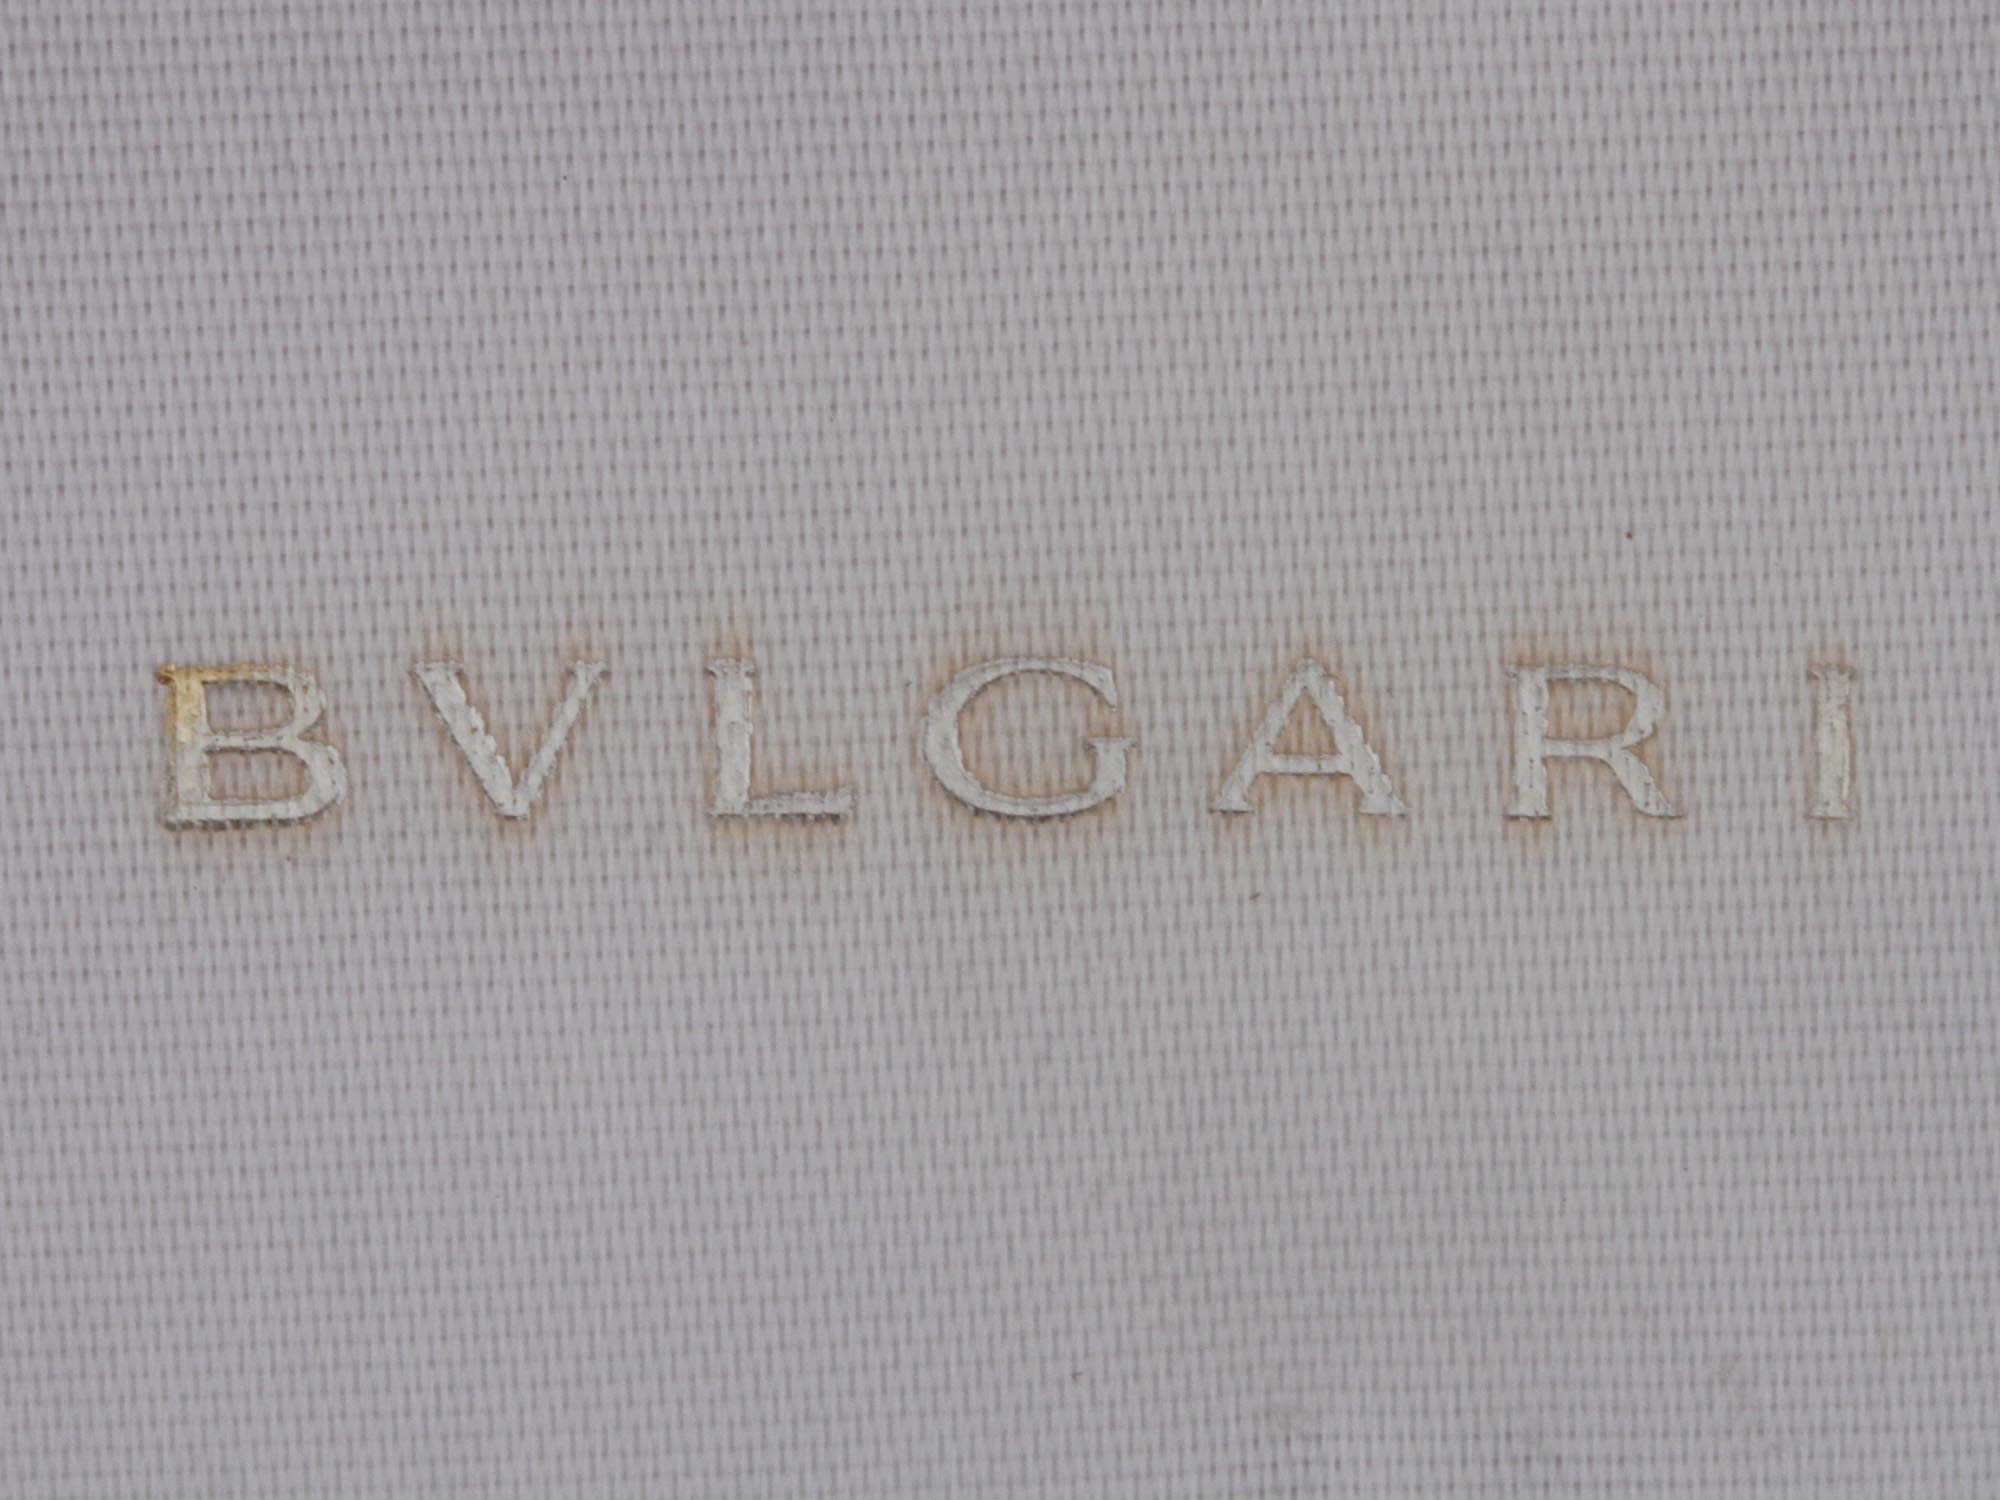 BVLGARI STERLING SILVER LUCKY SEVEN KEYCHAIN PIC-7